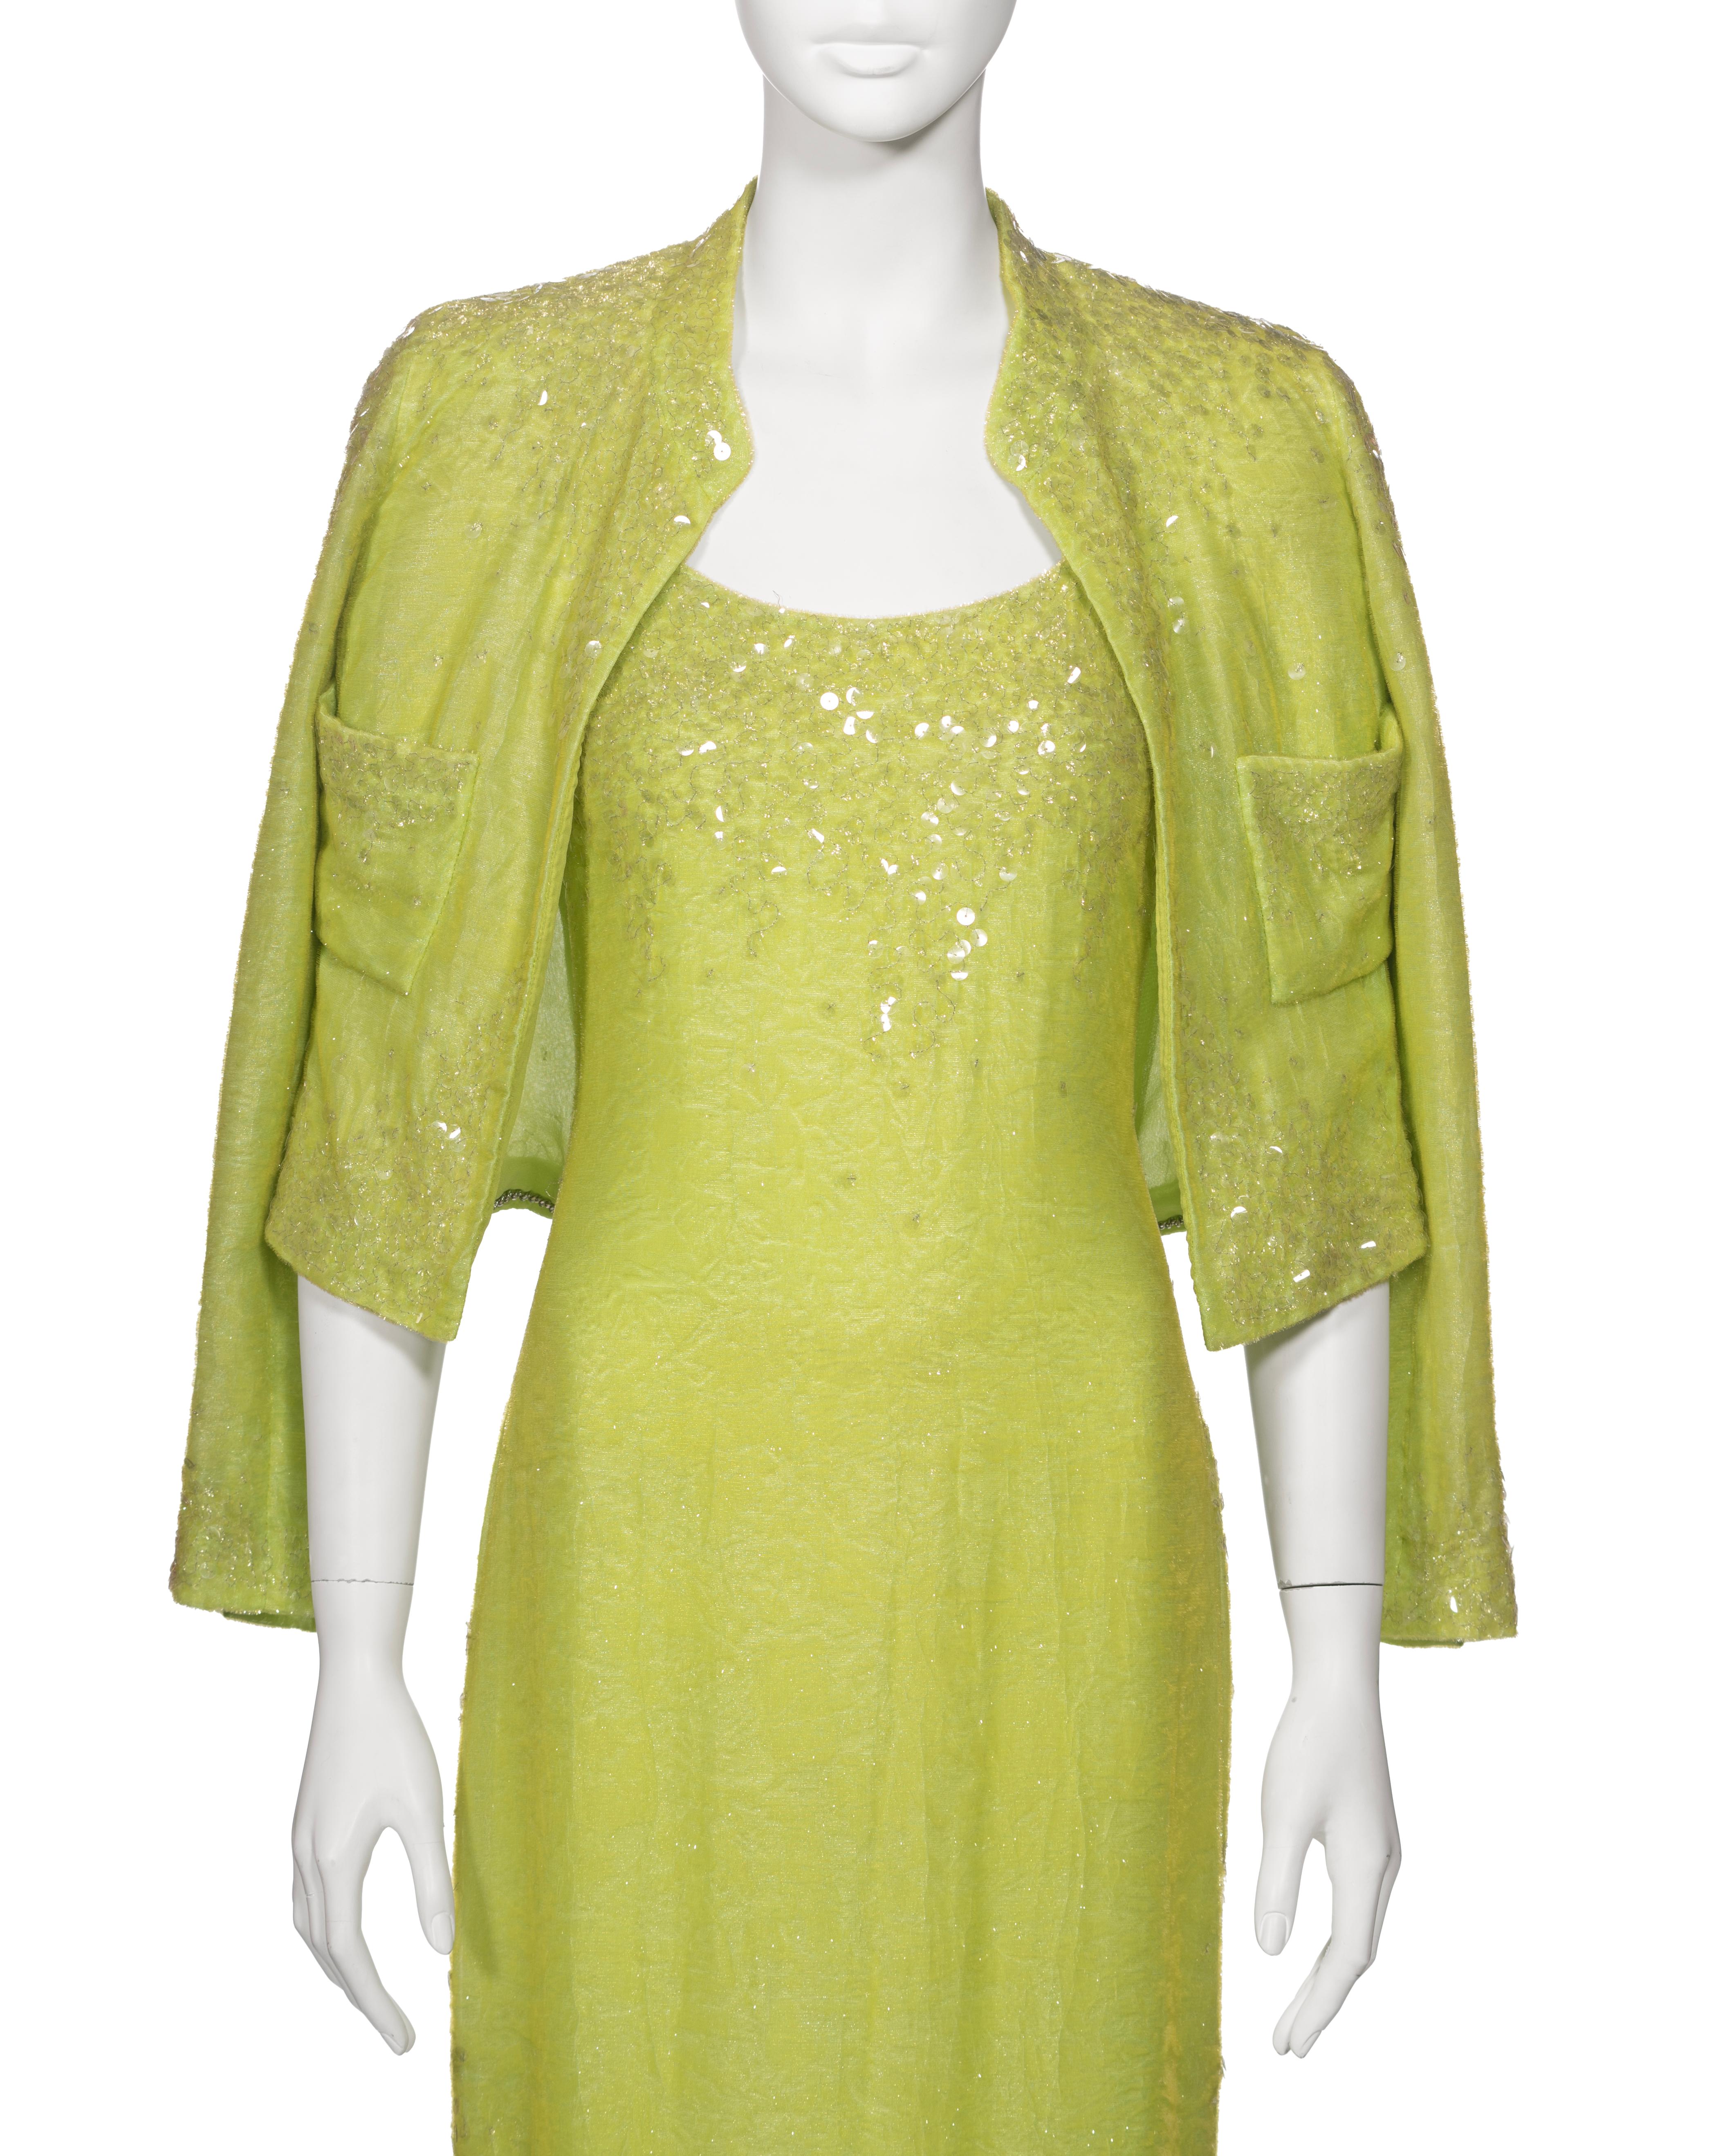 Chanel by Karl Lagerfeld Embellished Lime Green Velvet Dress and Jacket, ss 1997 In Good Condition For Sale In London, GB